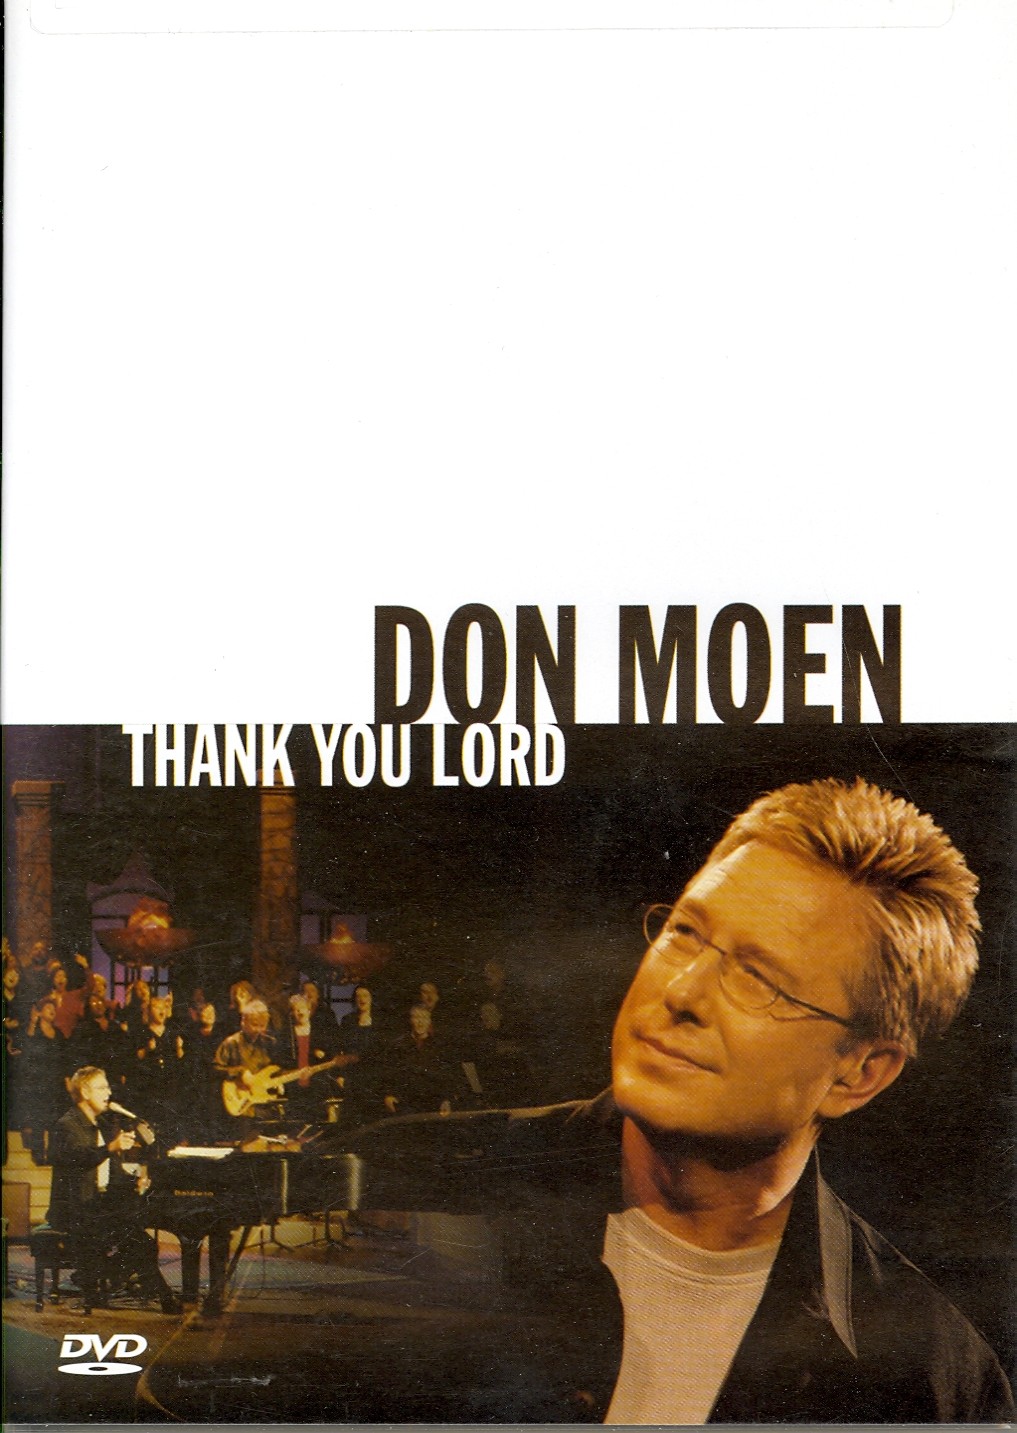 Thank you Lord DVD